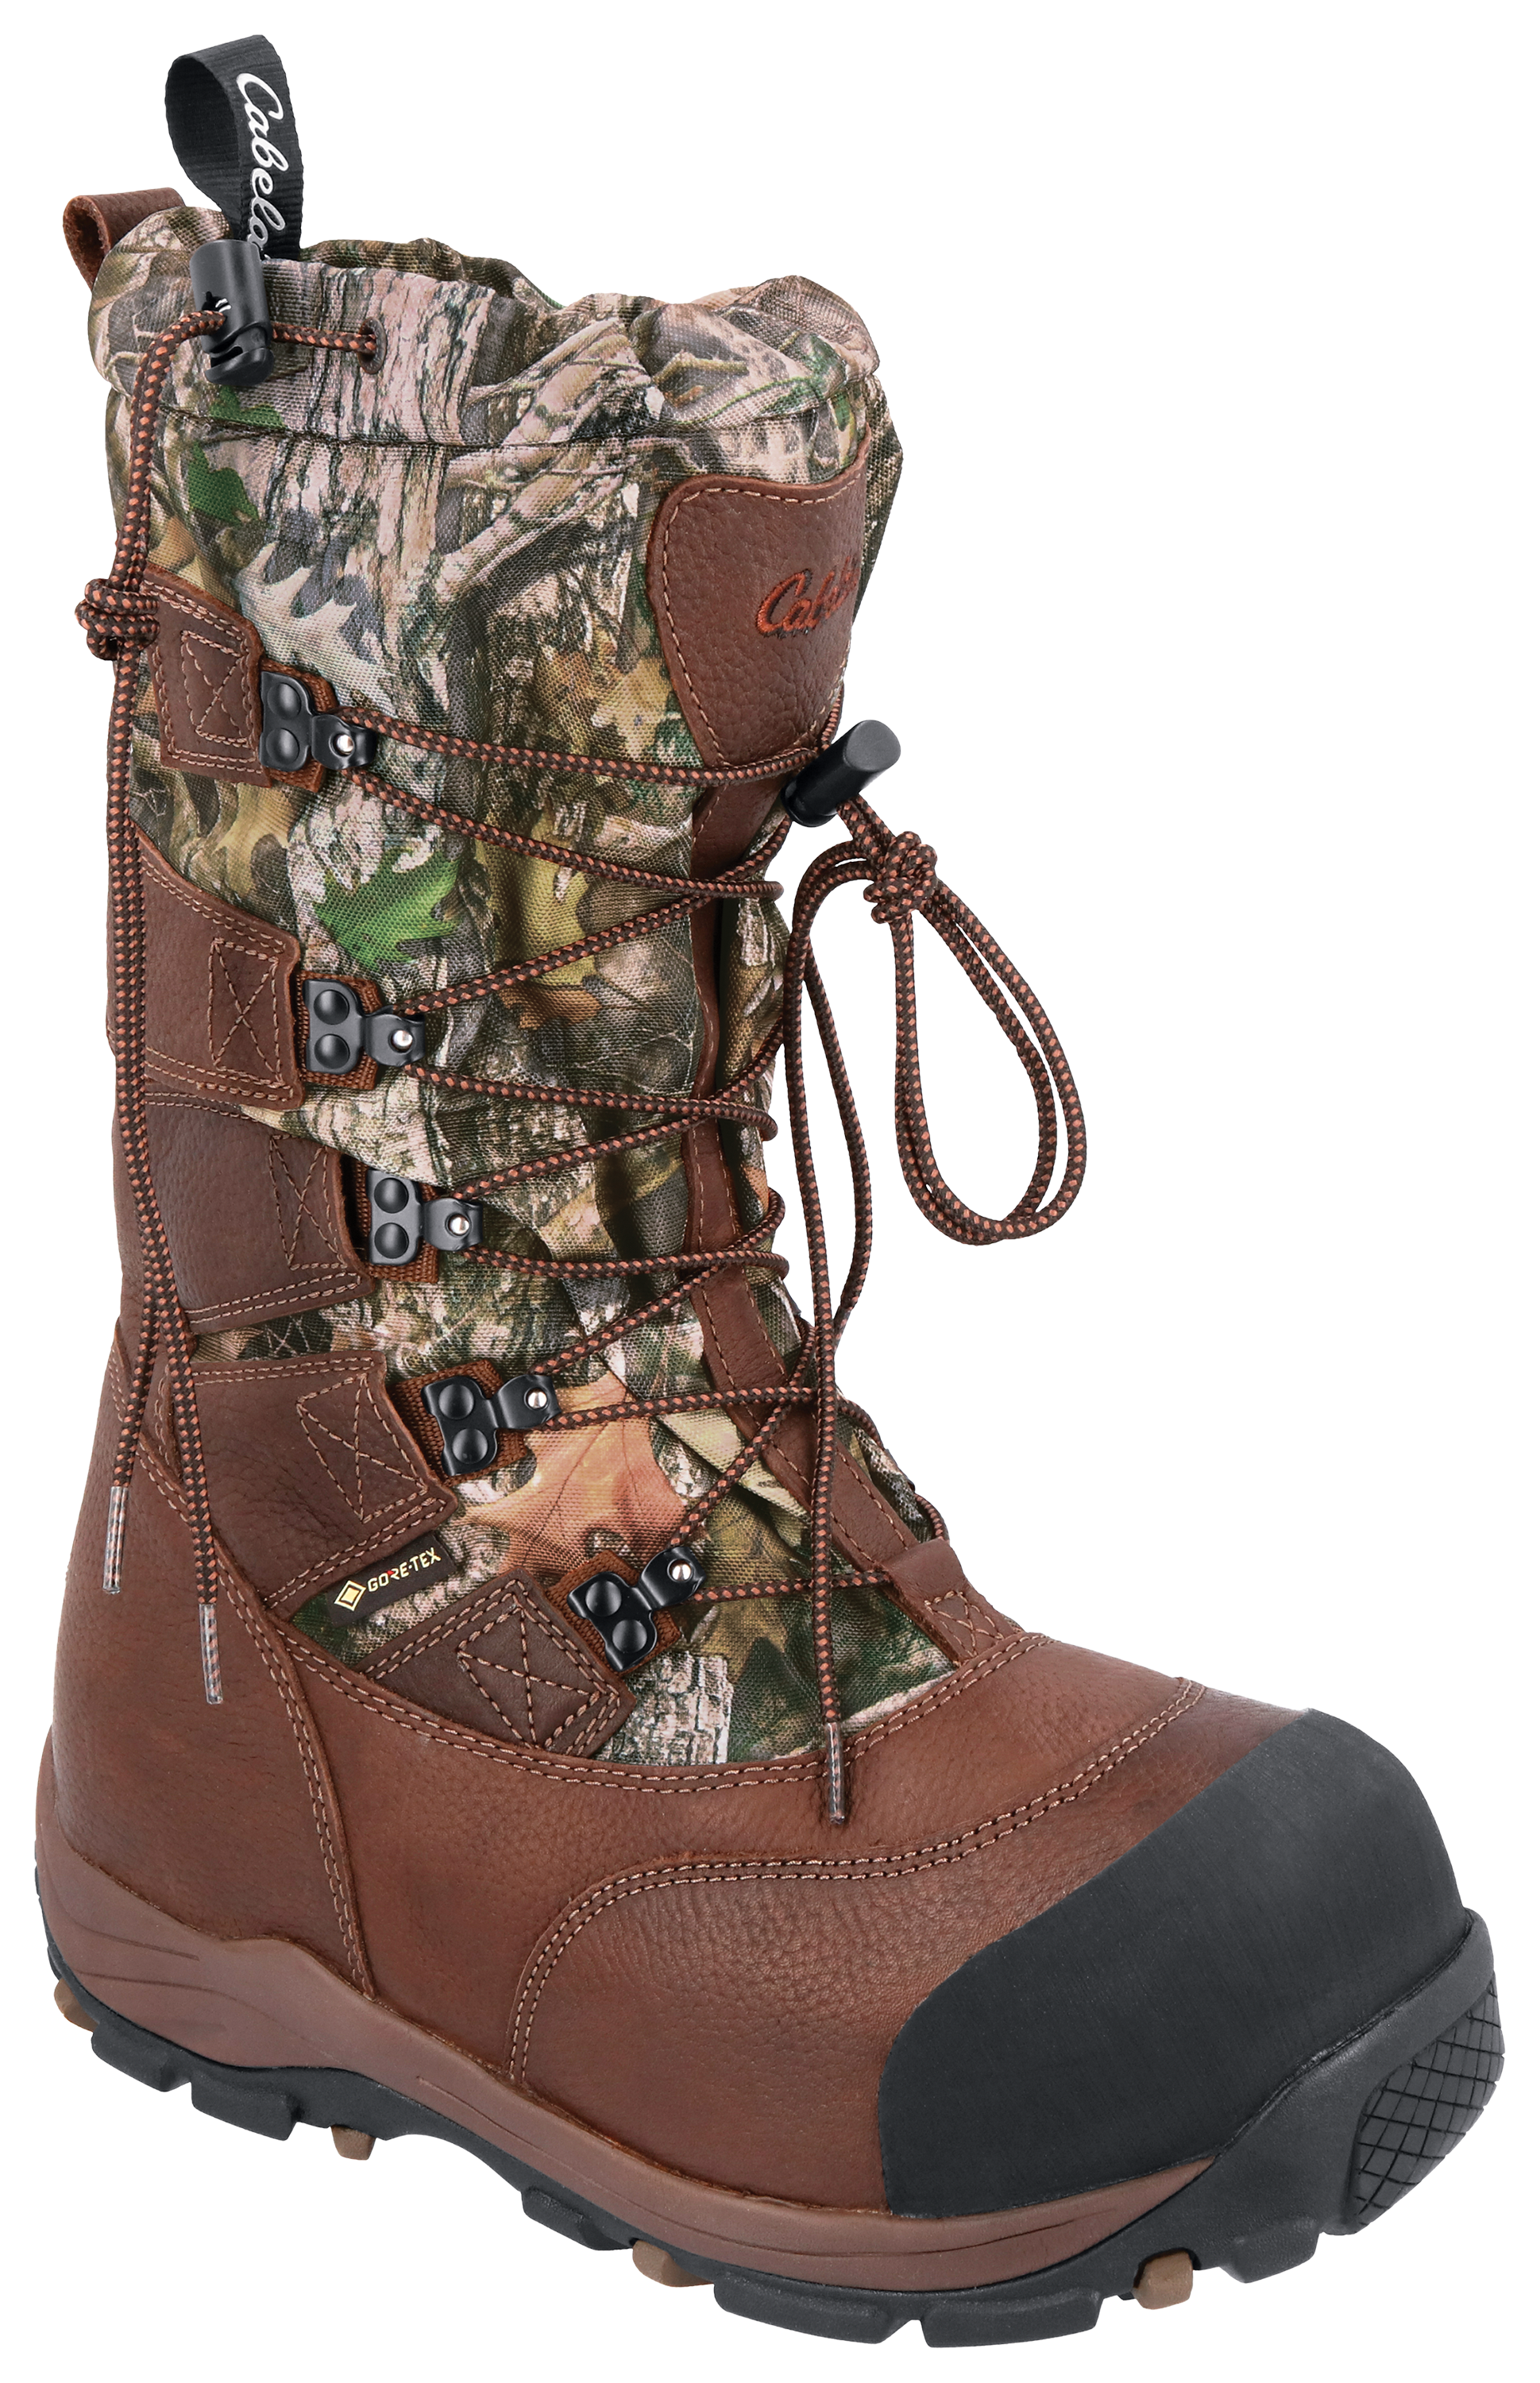 Cabela's Saskatchewan GORE-TEX Insulated Hunting Boots for Men